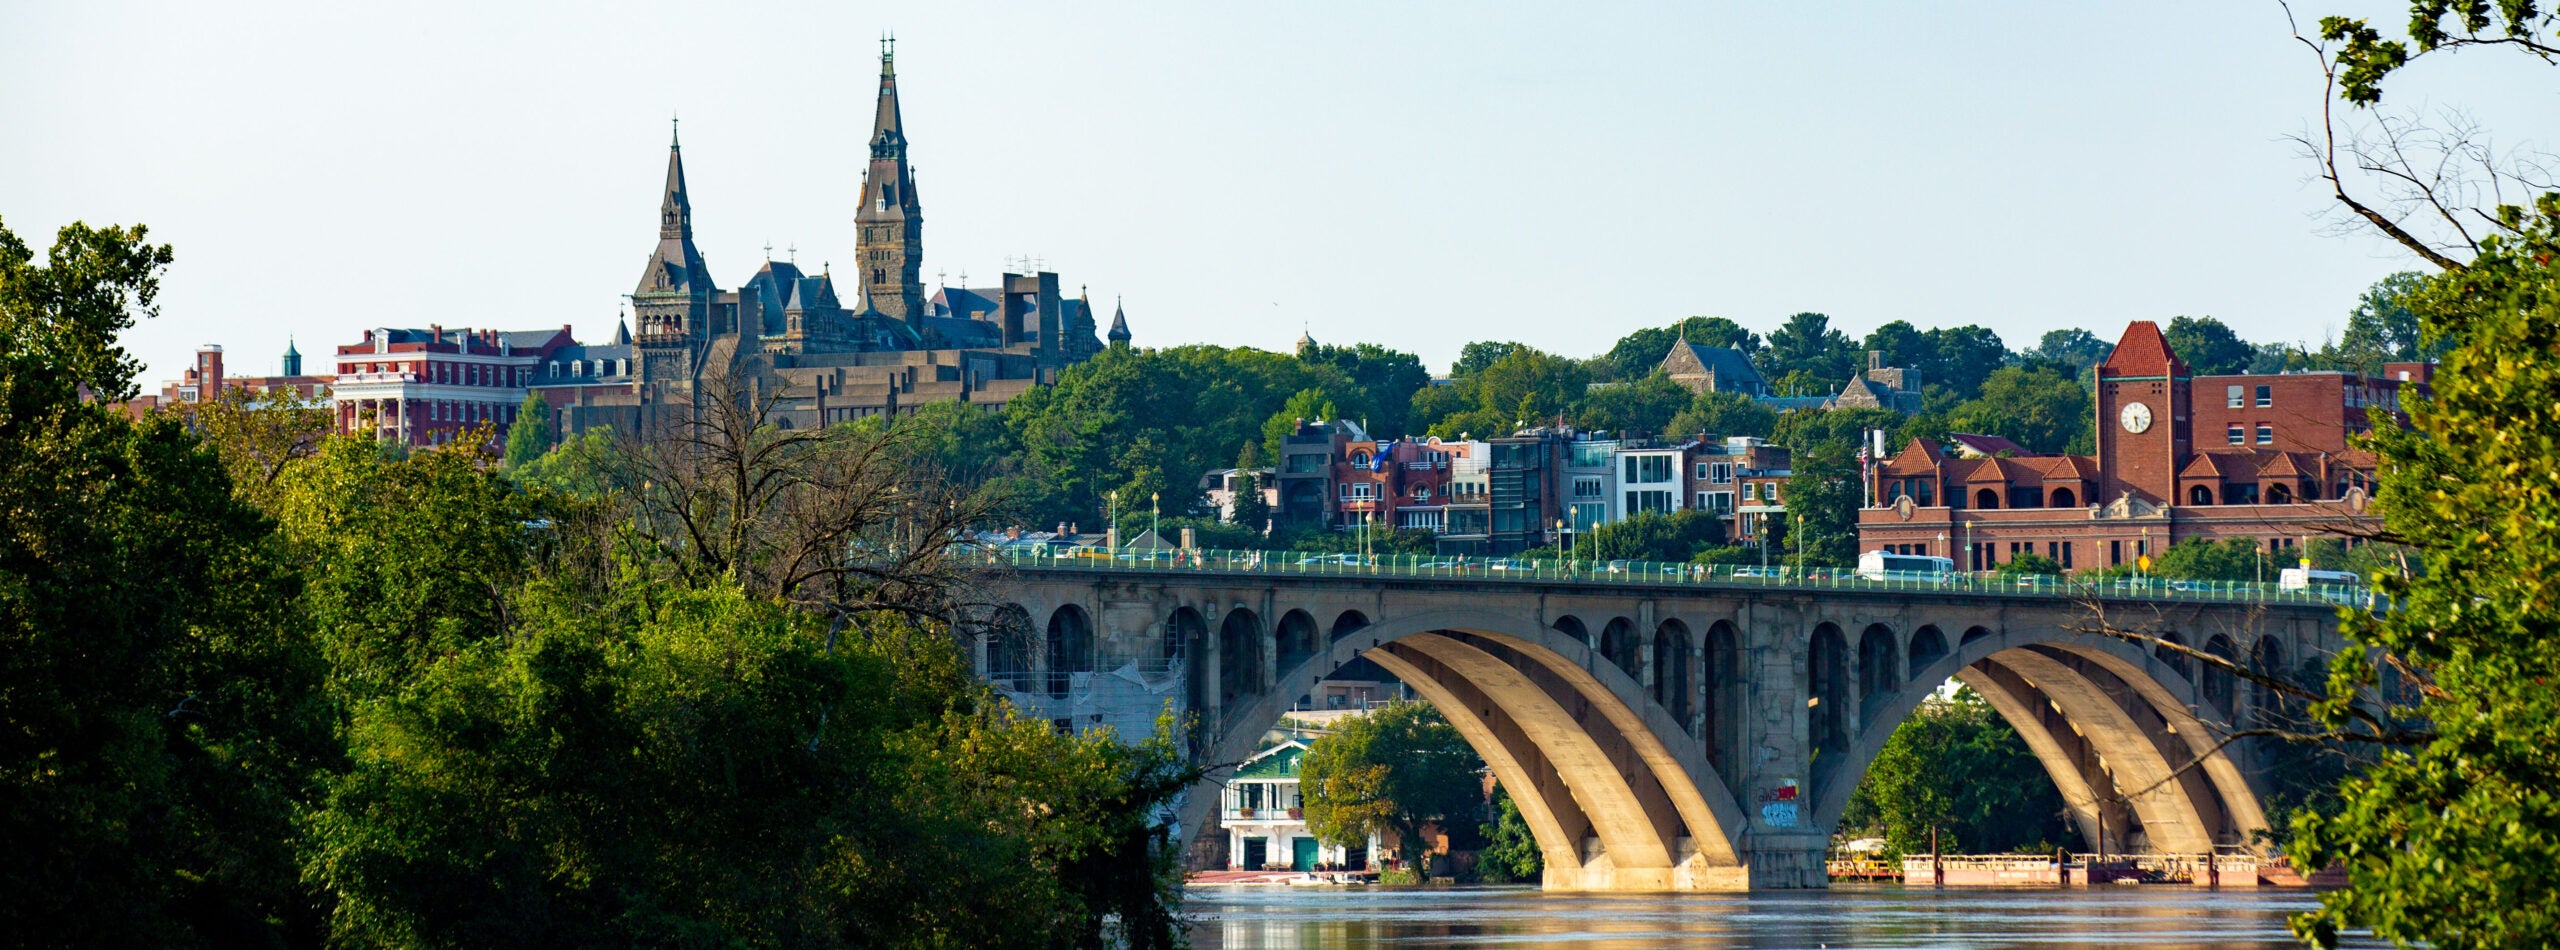 Georgetown skyline with Key Bridge in the foreground